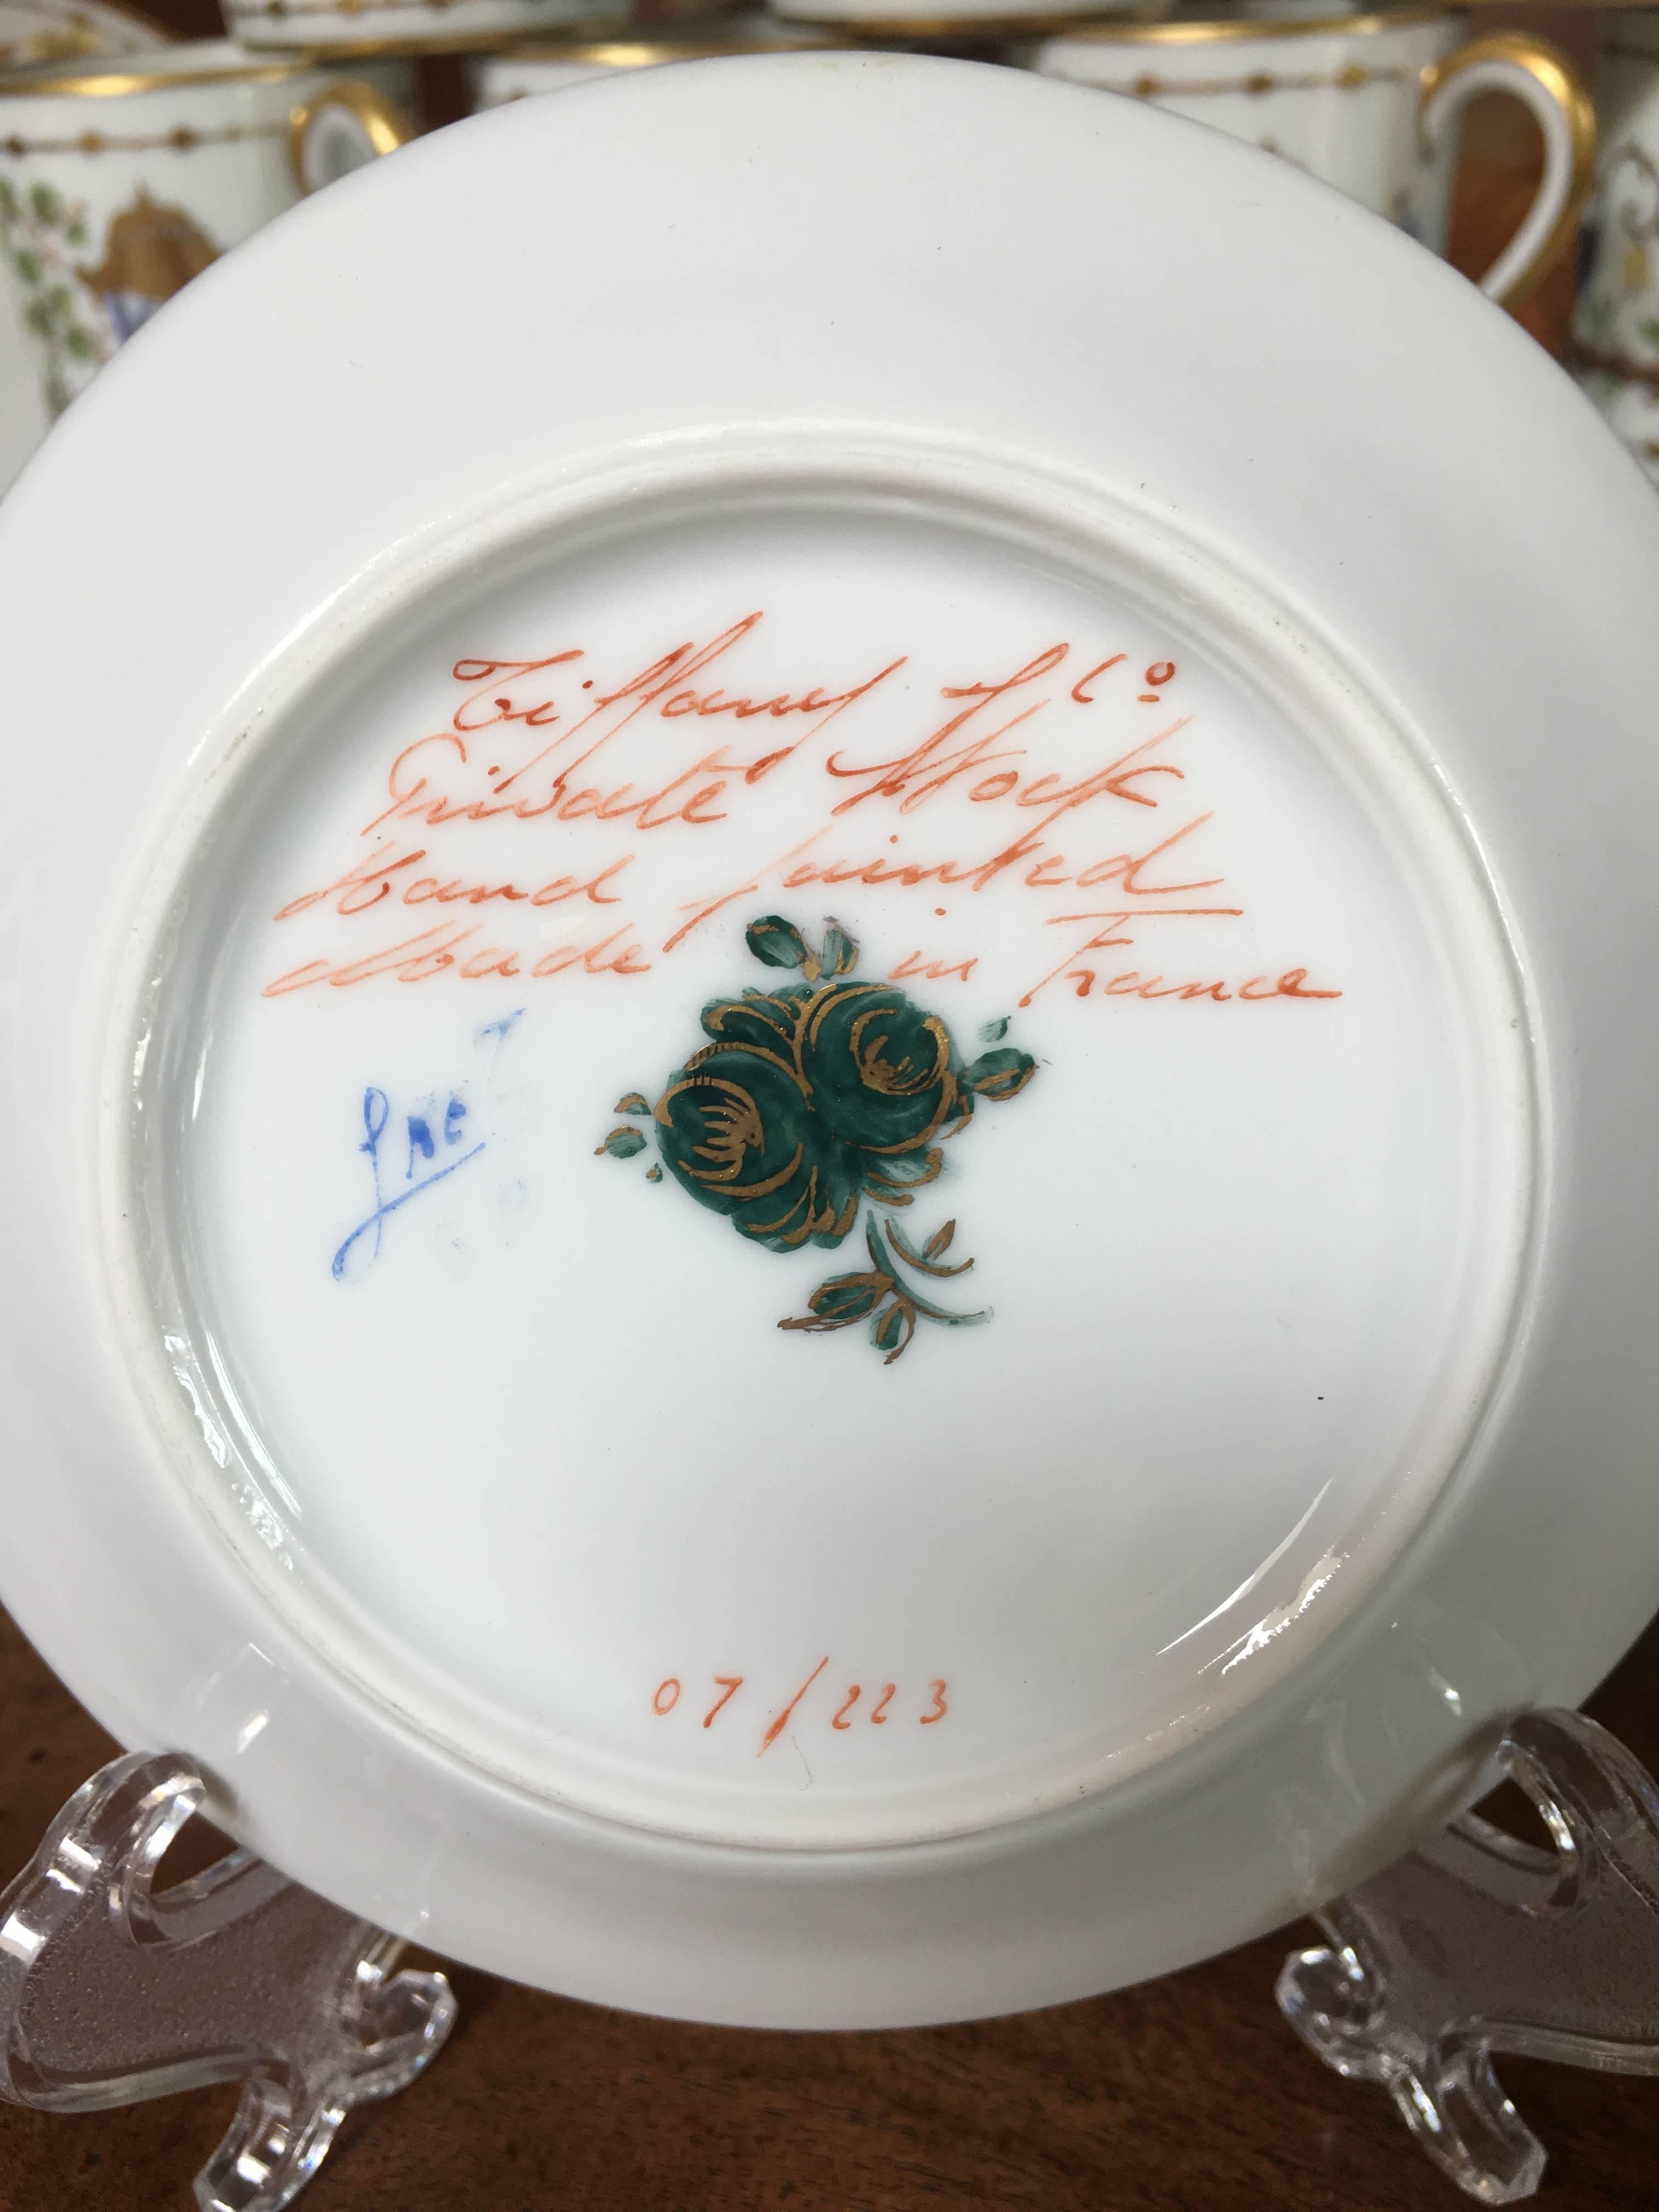 Crafted from Limoges porcelain, this hand-painted design was especially created for Tiffany & Co. by Camille Le Tallec, Le Tallec was purchased by
Tiffany & Co. in 1990. Le Tallec created hand-painted porcelain tableware for
royalty such as Queen